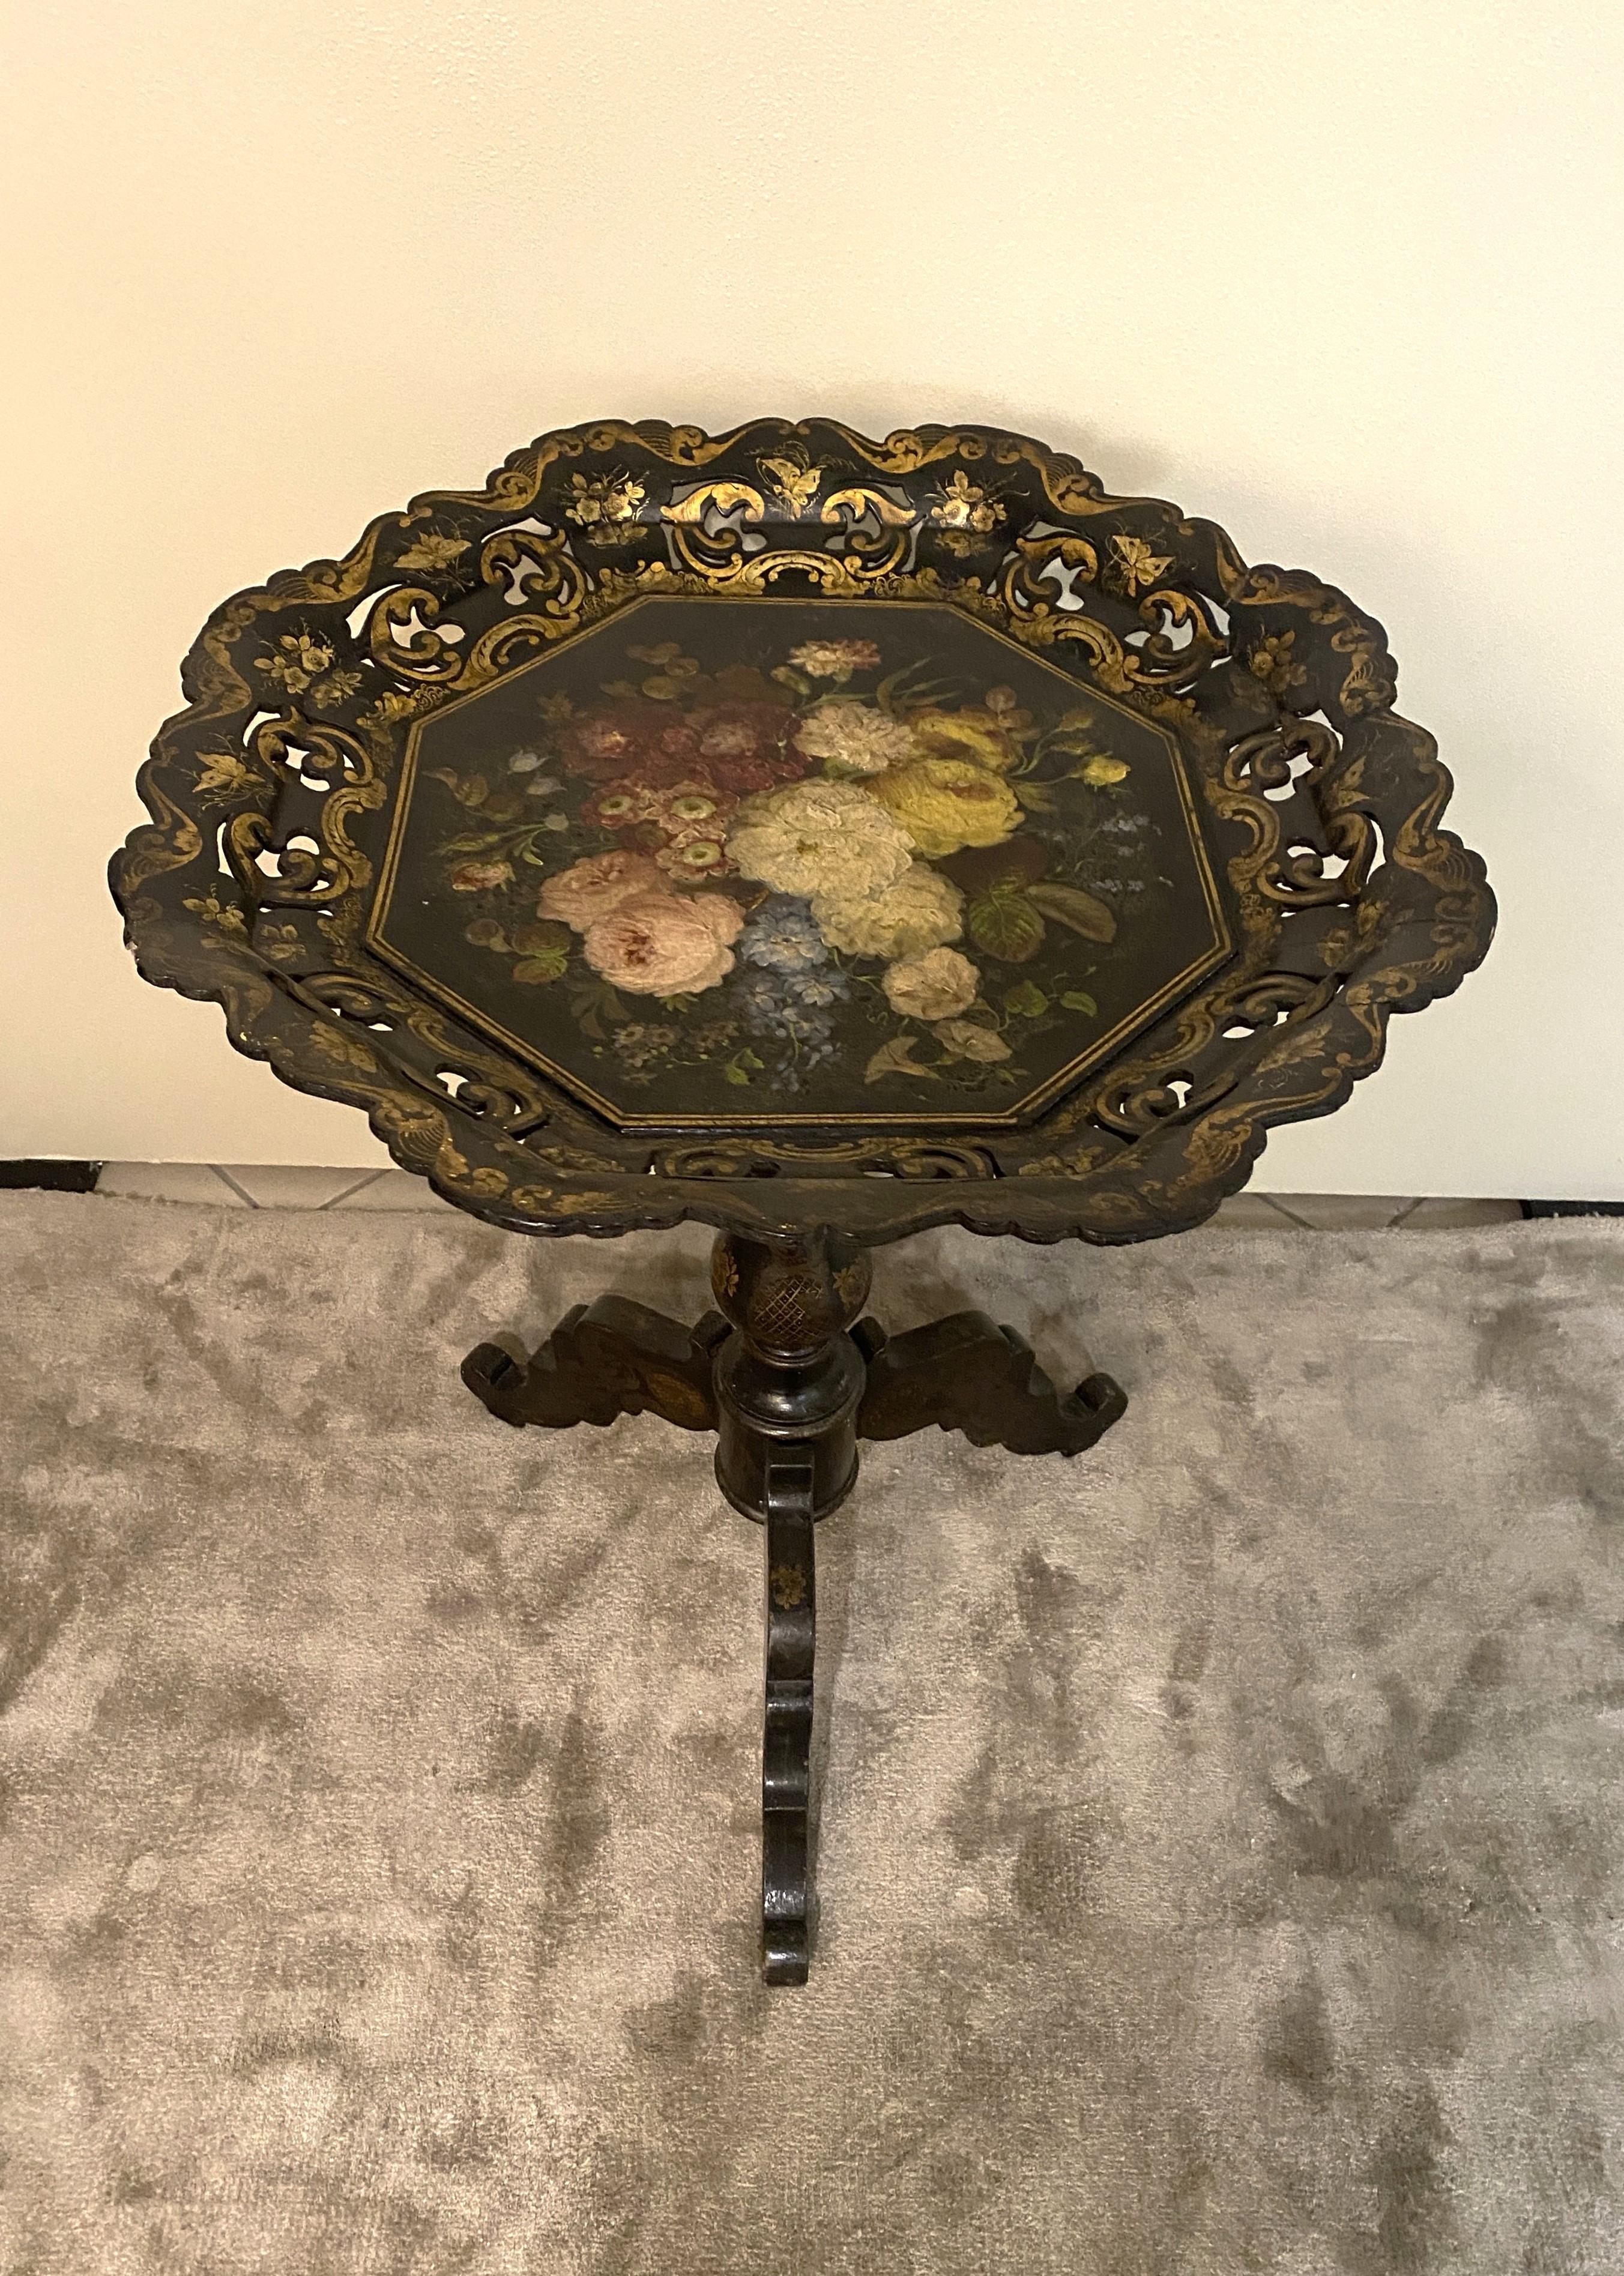 Beautiful french sailing table in Papier Machè.The upper part is formed by an octagonal top, made in papier machè, on which has been admirably hand painted a detailed and colorful floral composition. At top has been added a wonderful perforated